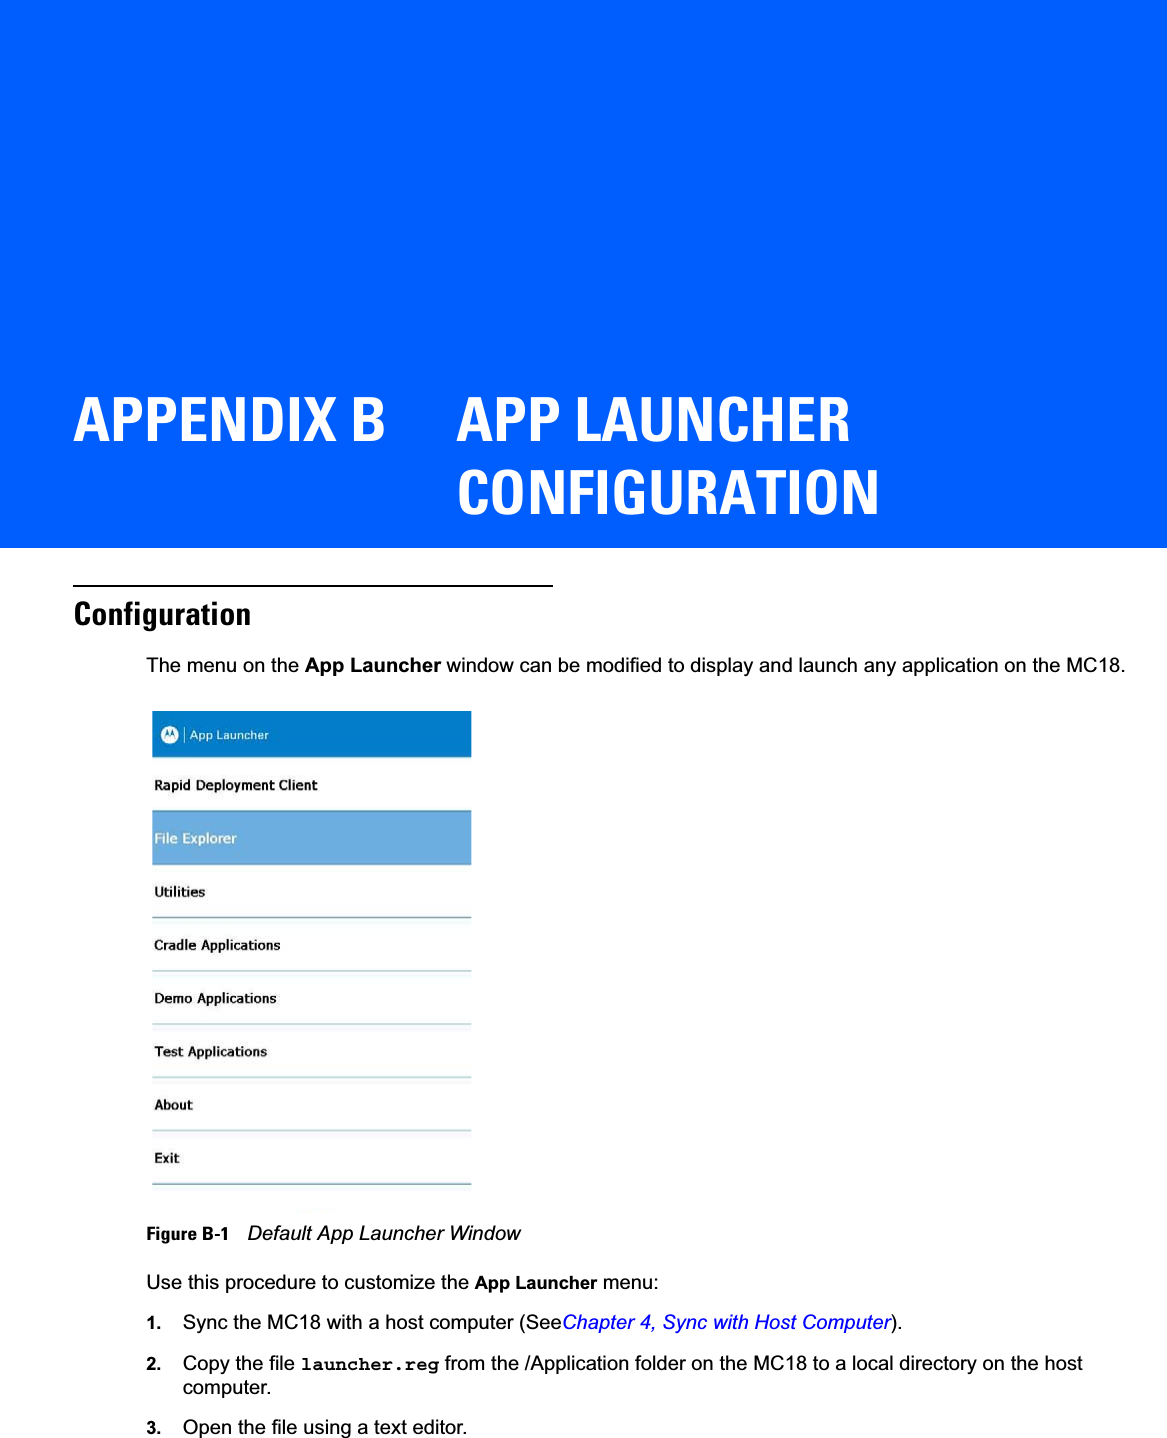 APPENDIX B APP LAUNCHER CONFIGURATIONConfigurationThe menu on the App Launcher window can be modified to display and launch any application on the MC18.Figure B-1    Default App Launcher WindowUse this procedure to customize the App Launcher menu:1. Sync the MC18 with a host computer (SeeChapter 4, Sync with Host Computer).2. Copy the file launcher.reg from the /Application folder on the MC18 to a local directory on the host computer.3. Open the file using a text editor.